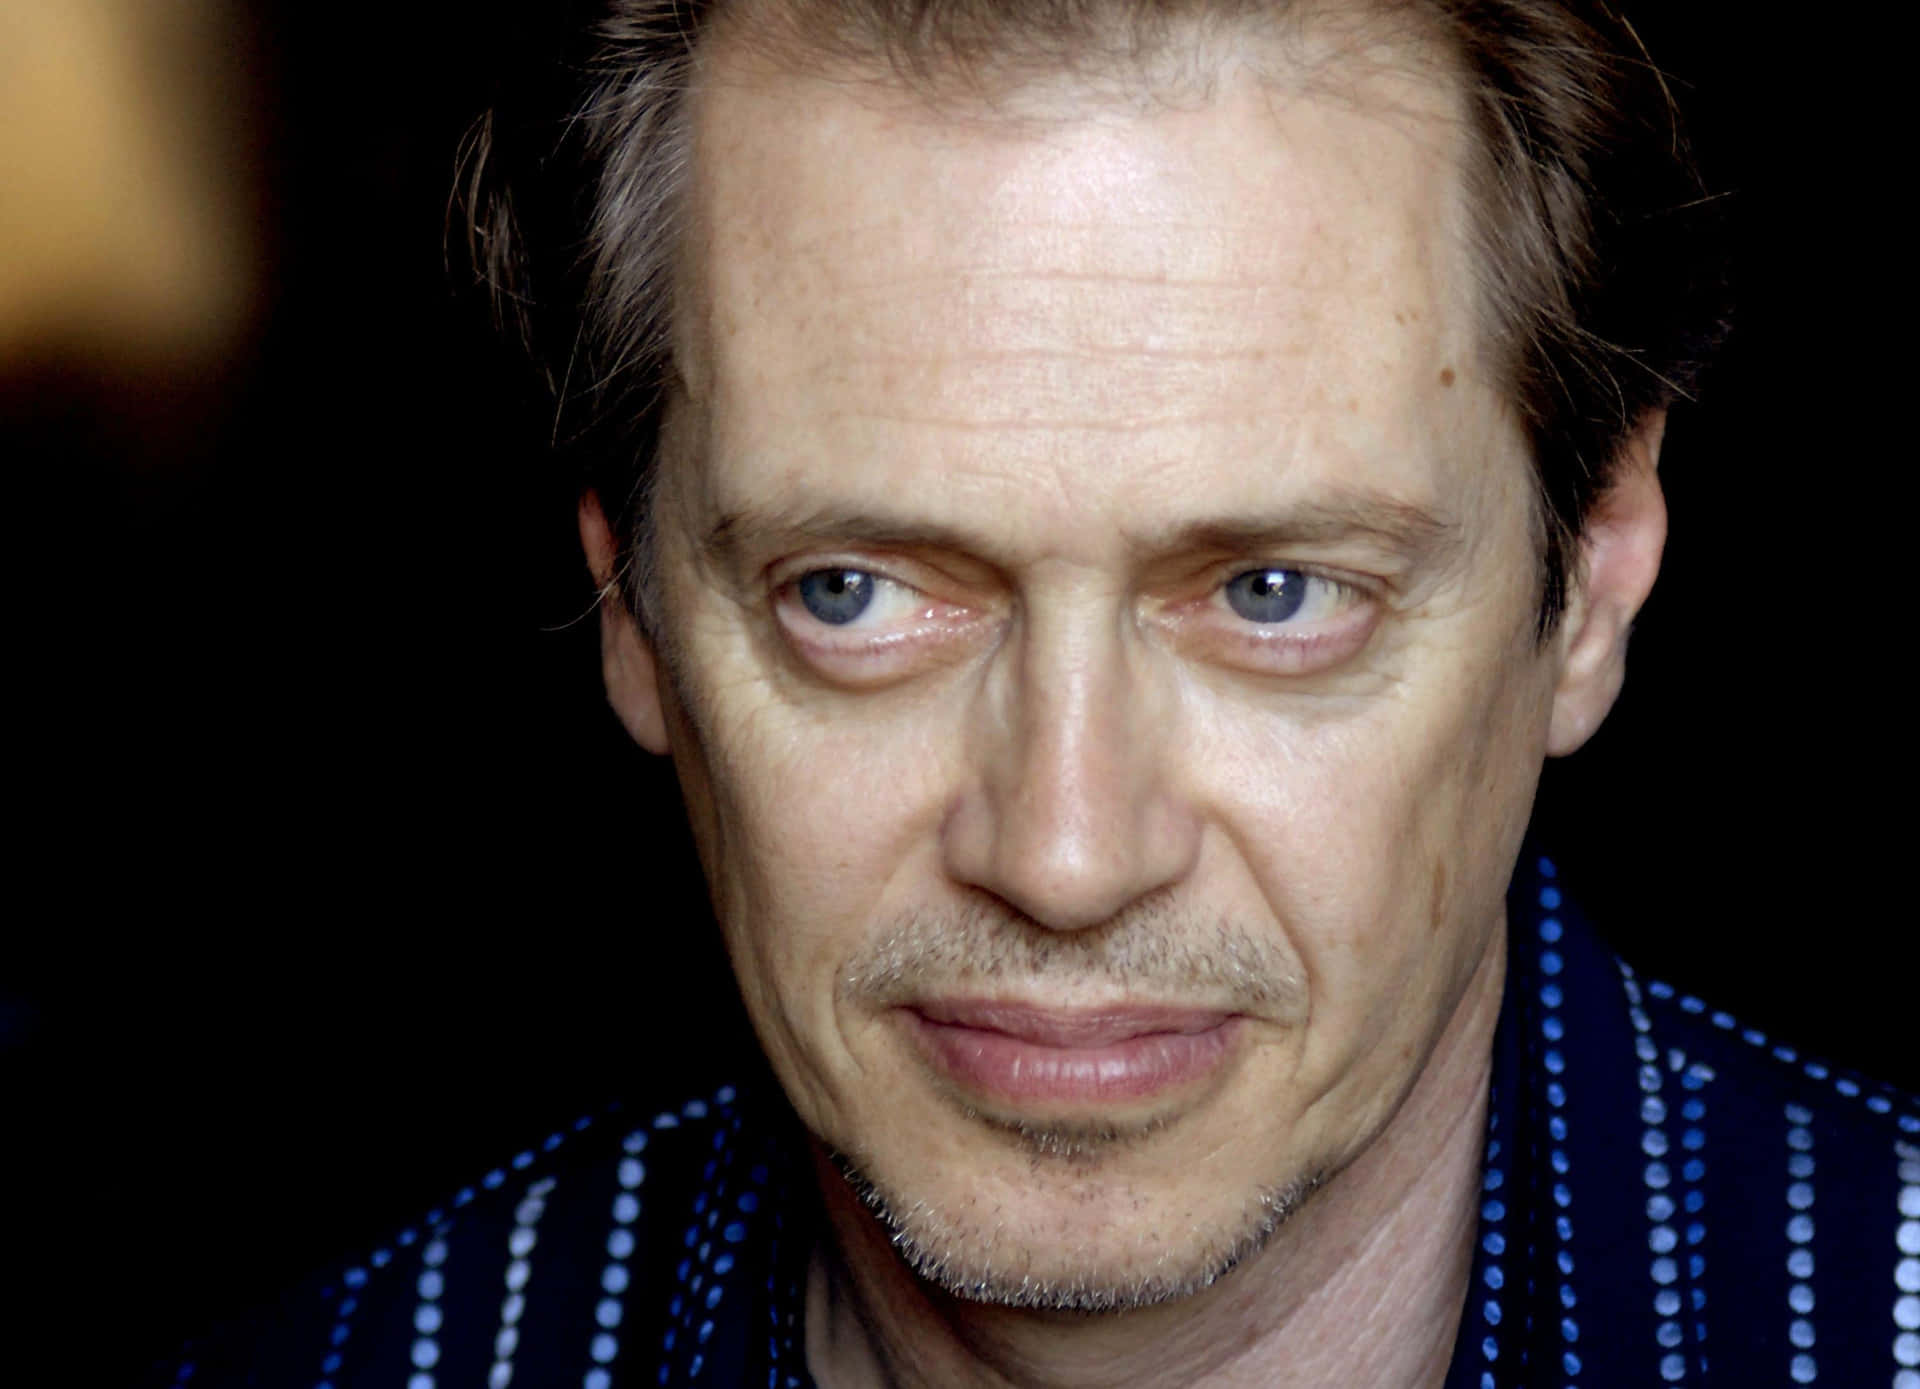 Hollywood Actor Steve Buscemi, In A Contemplative Moment. Background